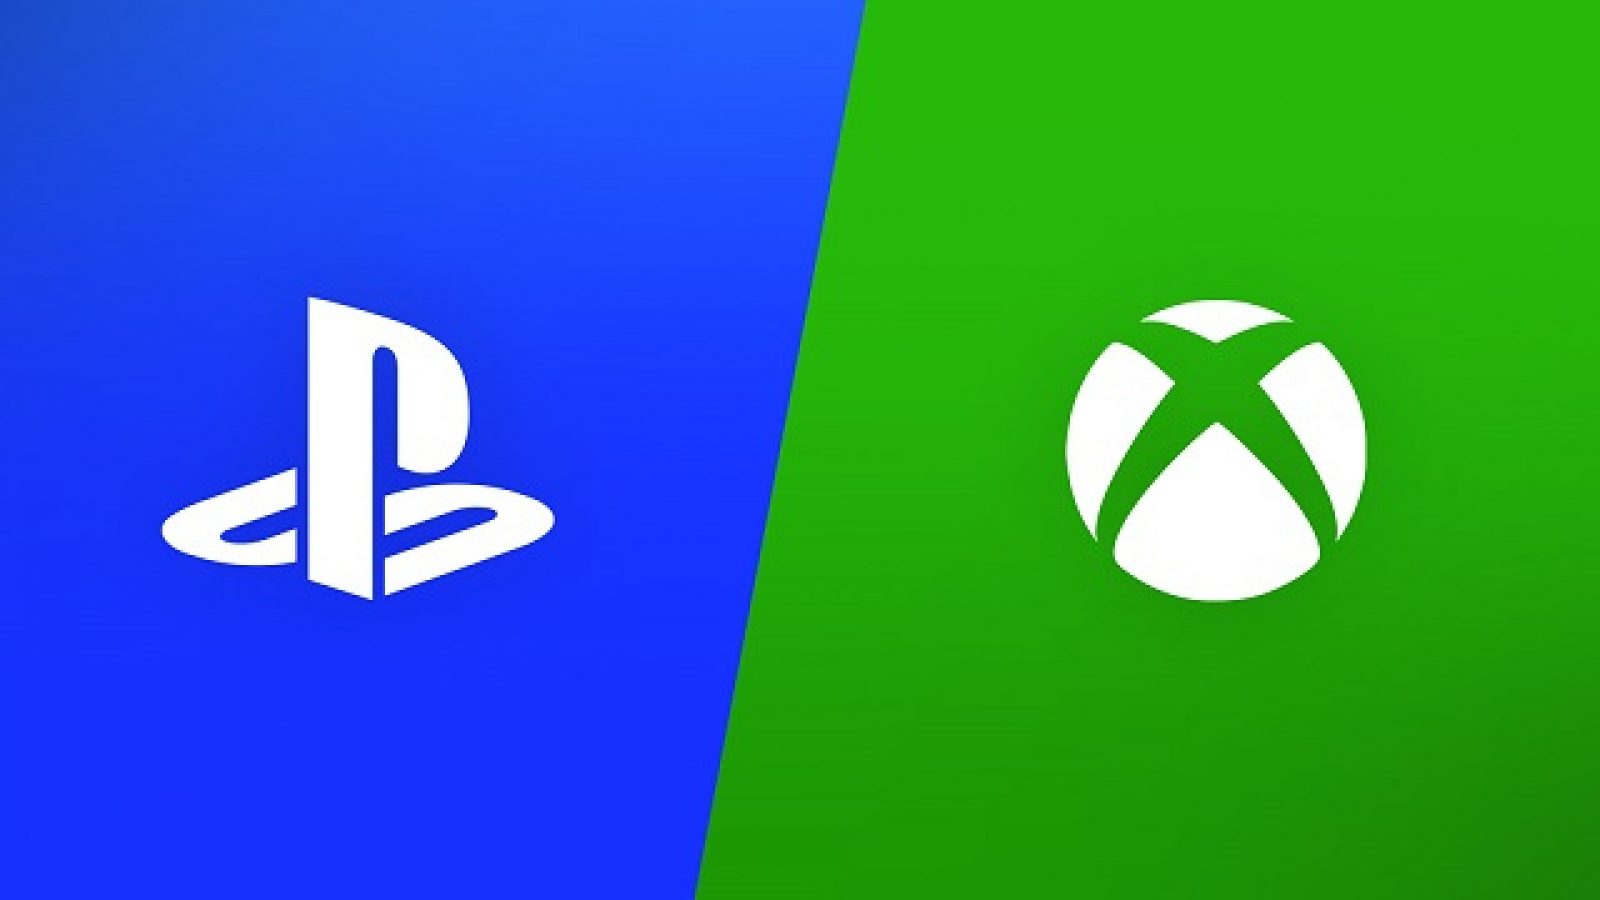 PS5 Rumors State the Console Will Outperform Xbox Scarlett